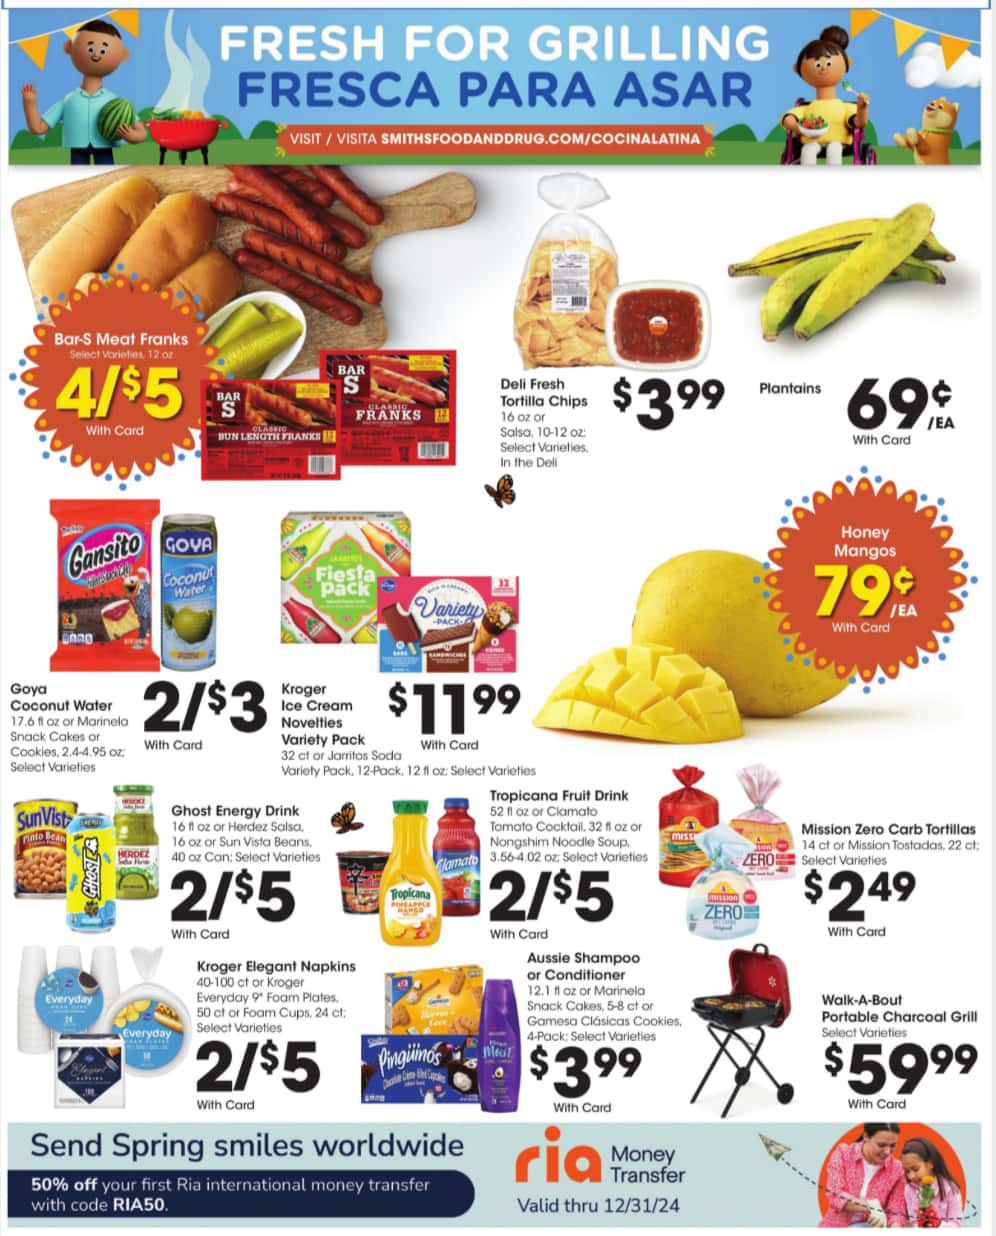 Smith's Weekly Ad July 2024 Weekly Sales, Deals, Discounts and Digital Coupons.